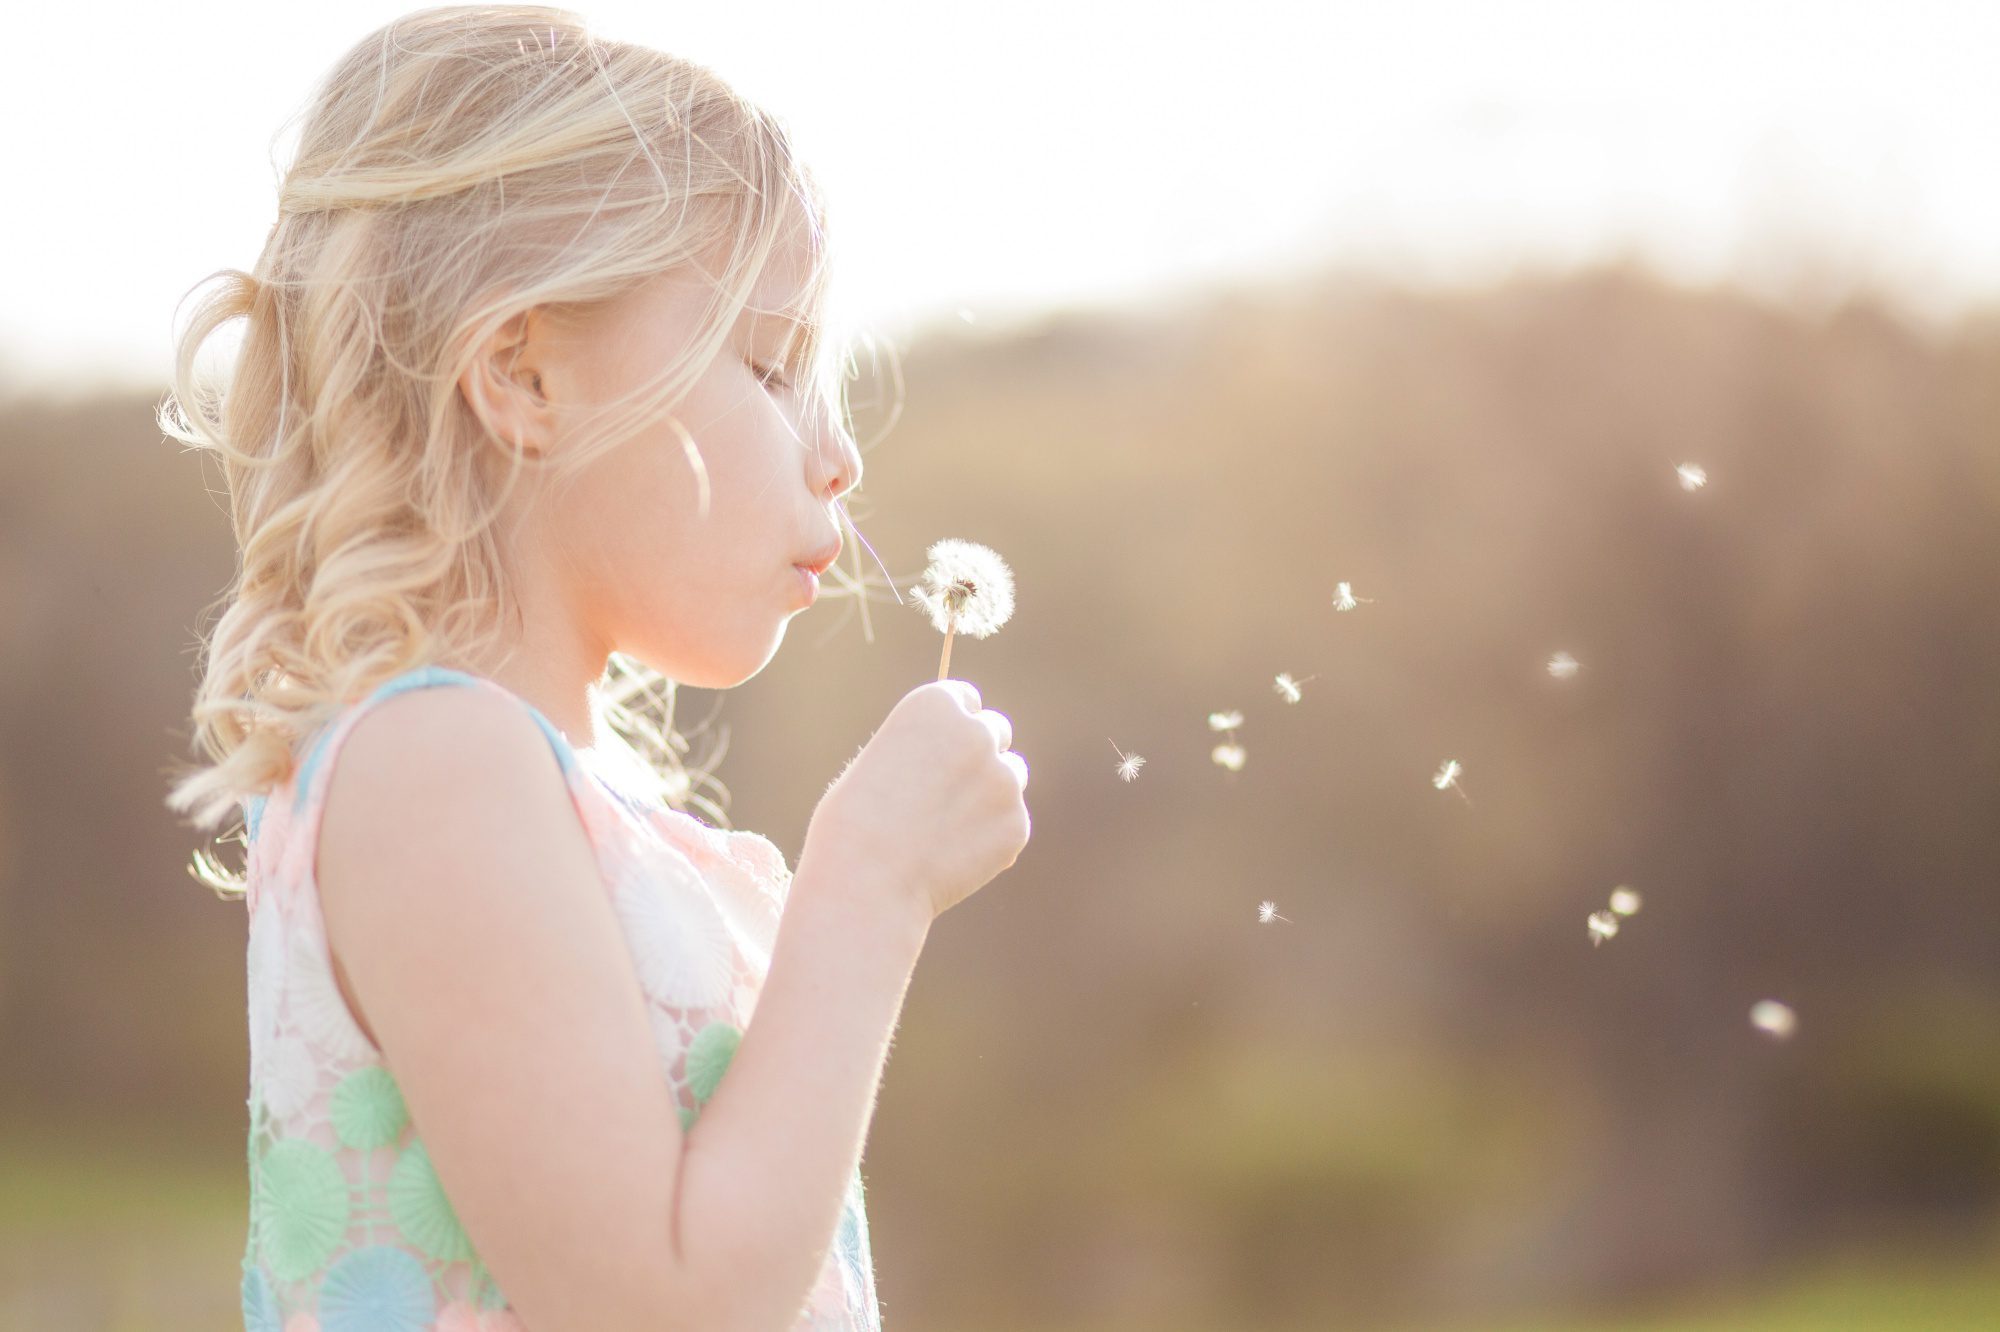 Blowing dandelions at spring photography session with kids at Ravenswood Mansion in Brentwood TN. Photo by Krista Lee Photography, Franklin TN